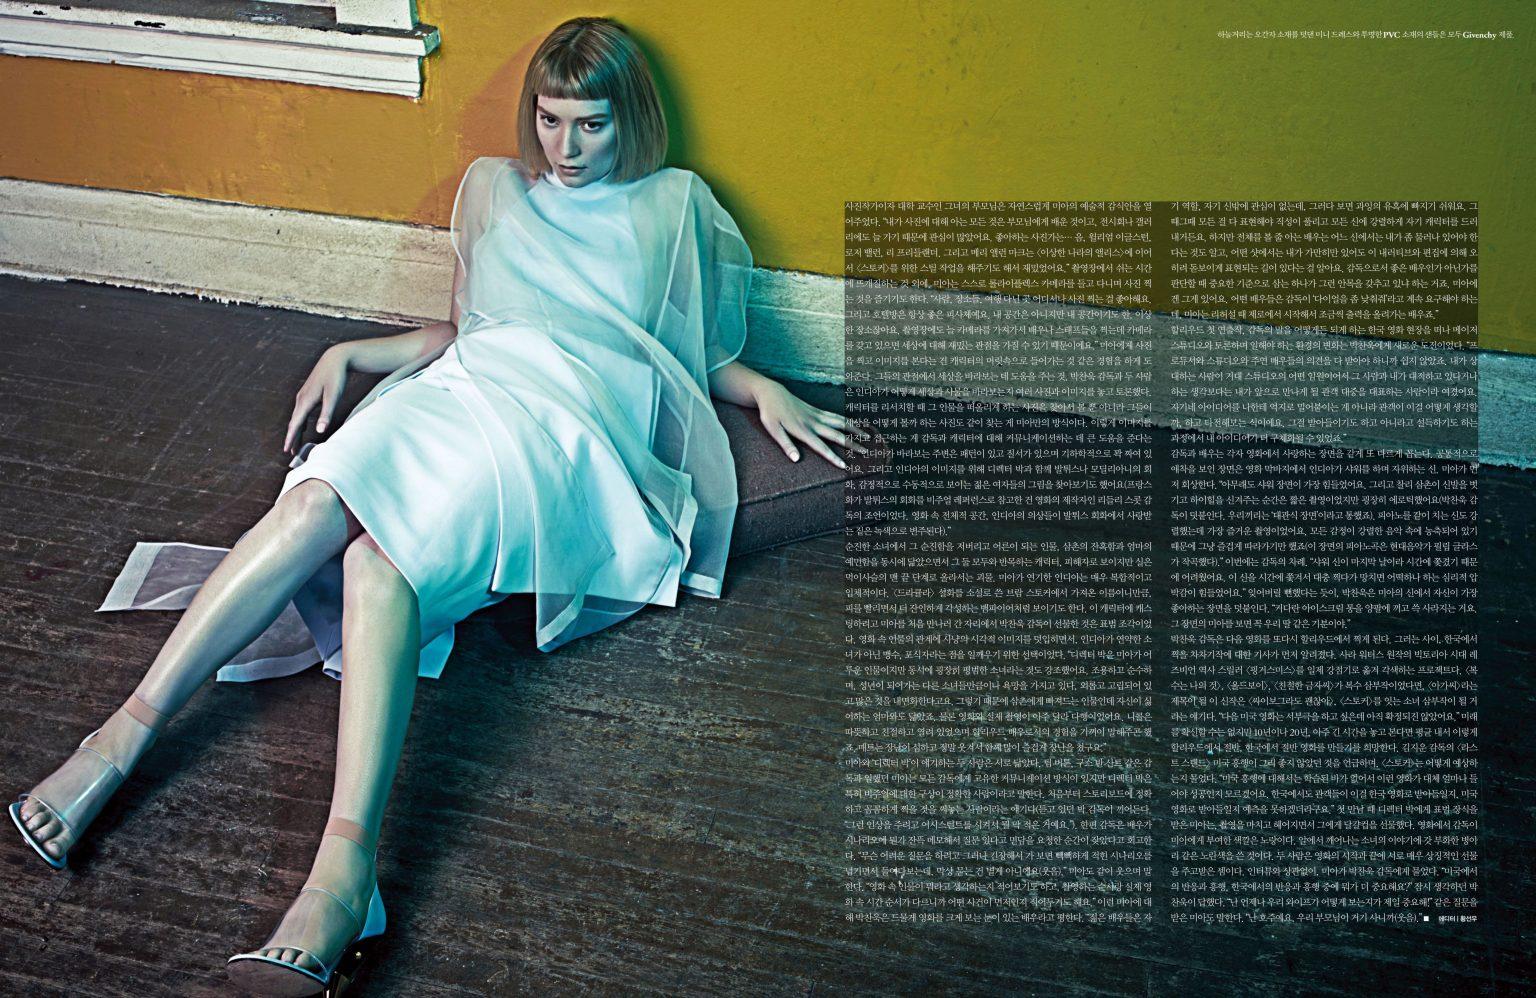 49 Mia Wasikowska Nude Pictures Flaunt Her Well-Proportioned Body 35